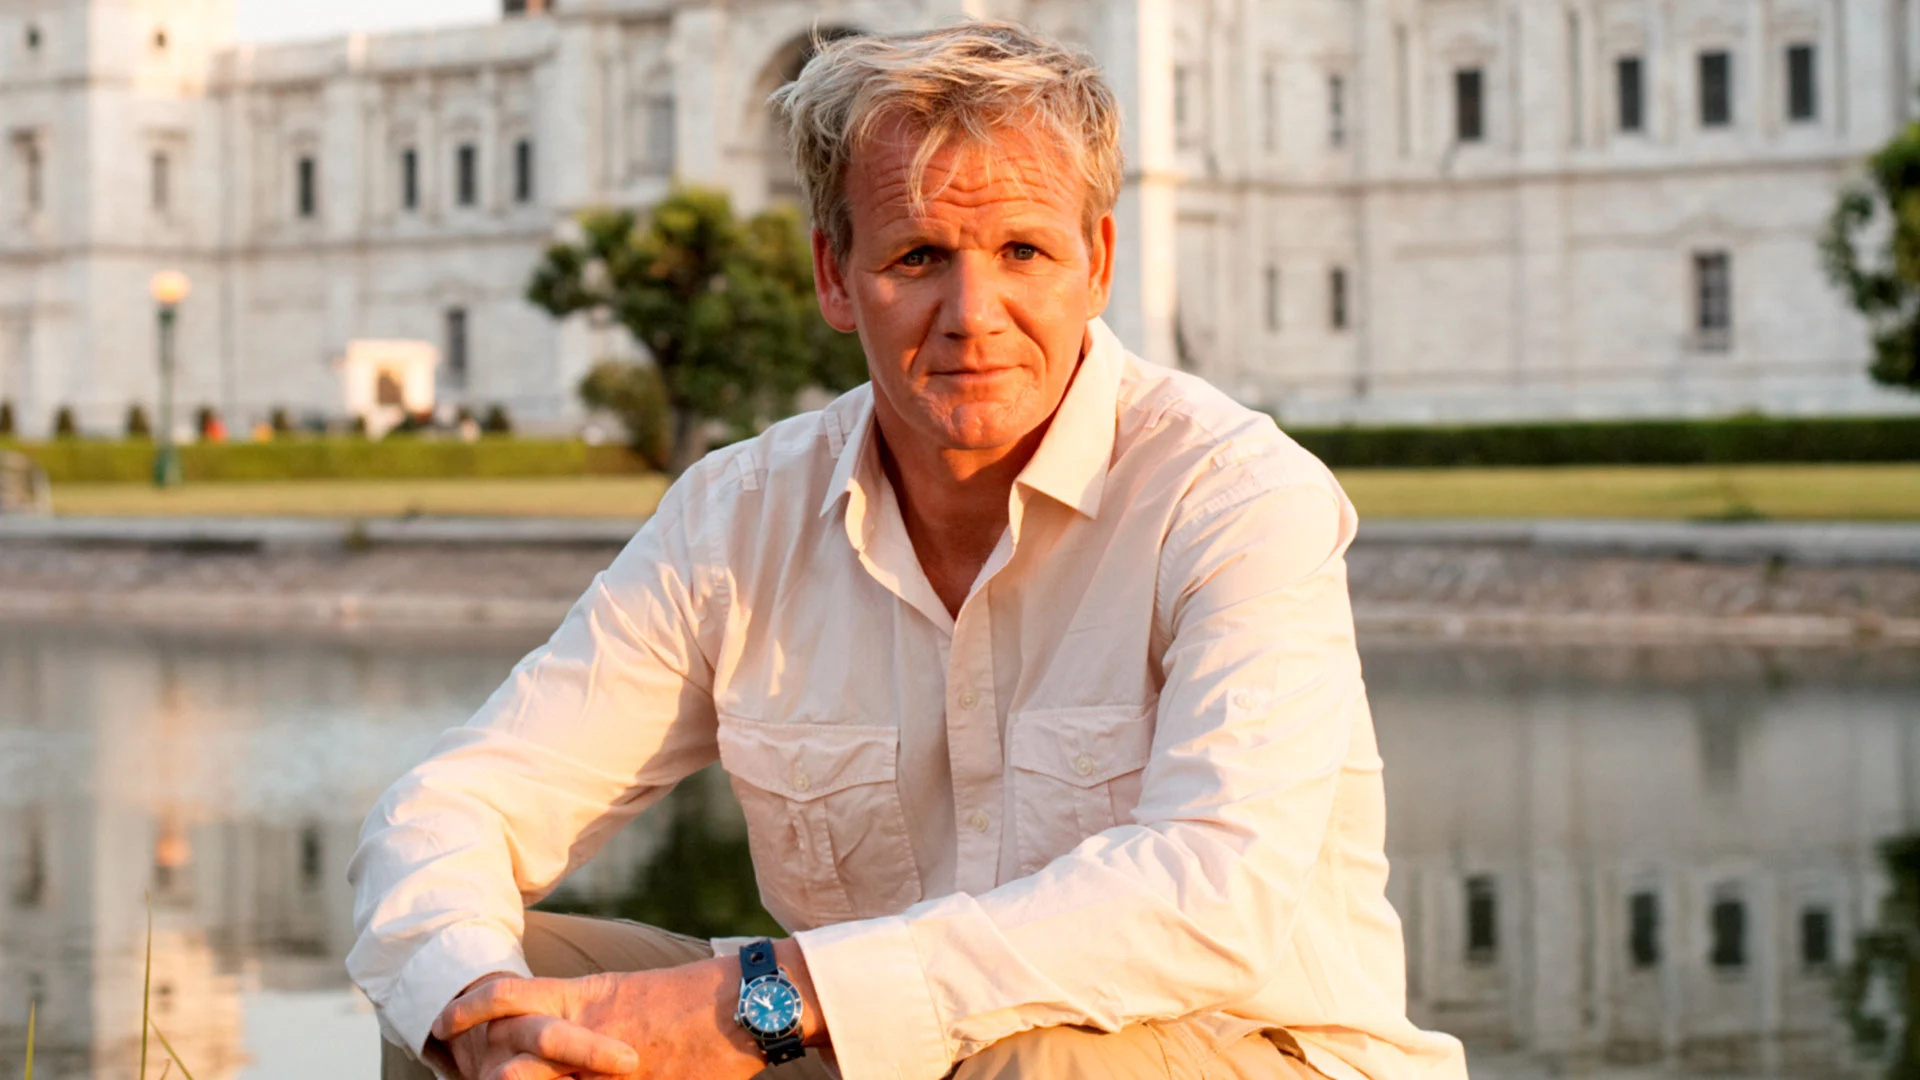 Gordon Ramsay: Launched the first international restaurant, Verre, in Dubai, in 2001. 1920x1080 Full HD Background.